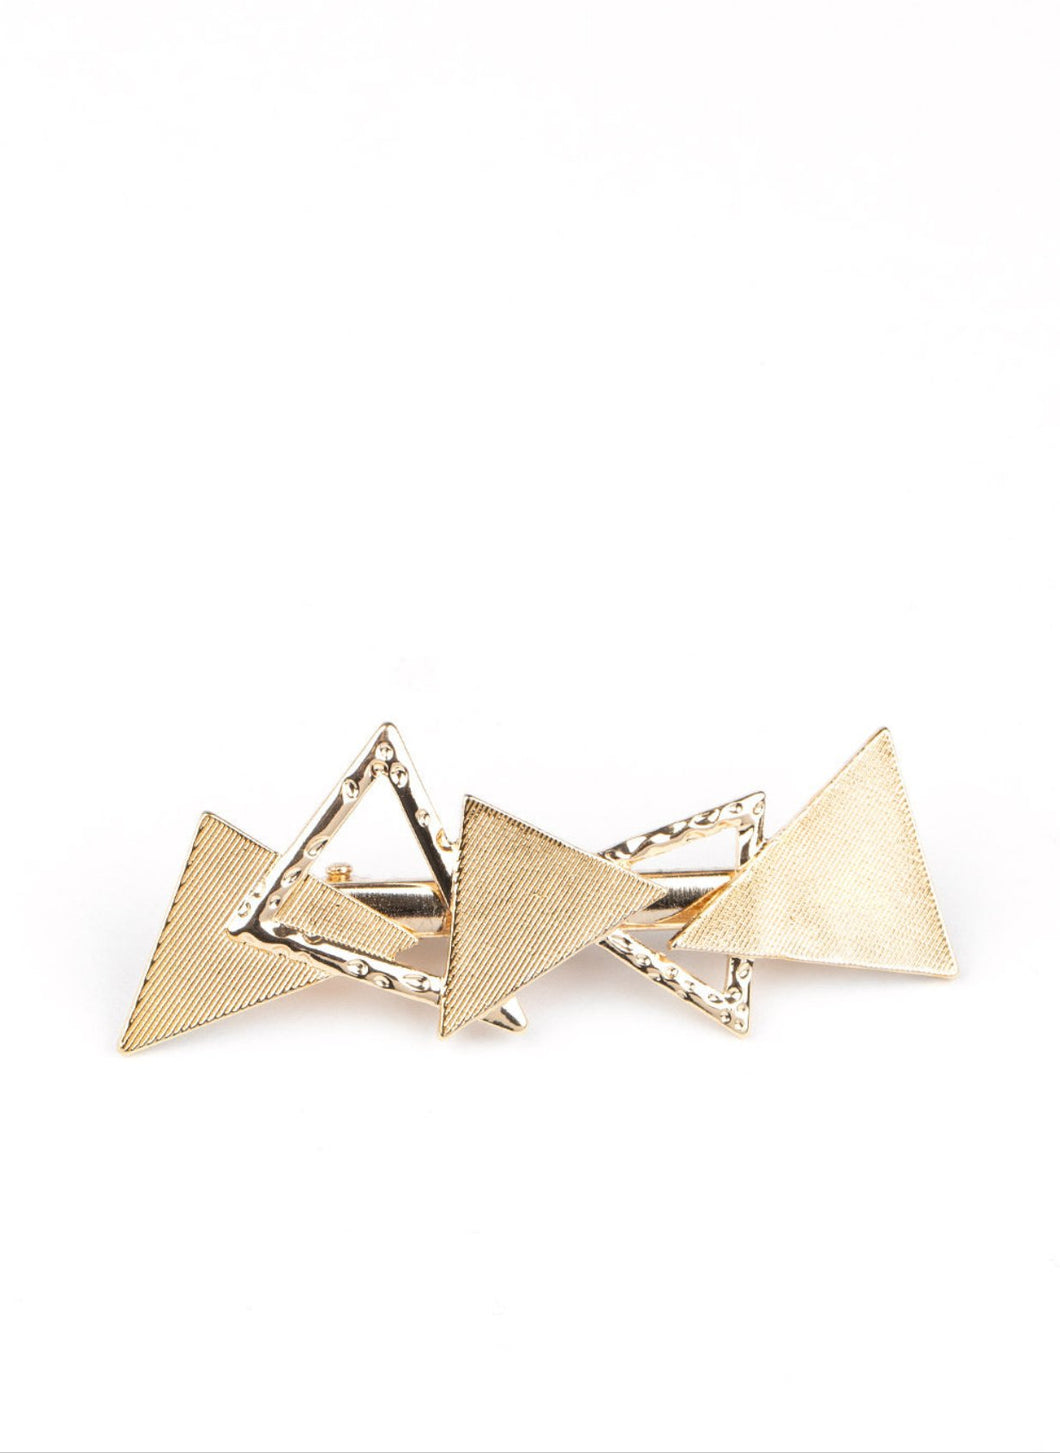 Know All The TRIANGLES Hair Clip